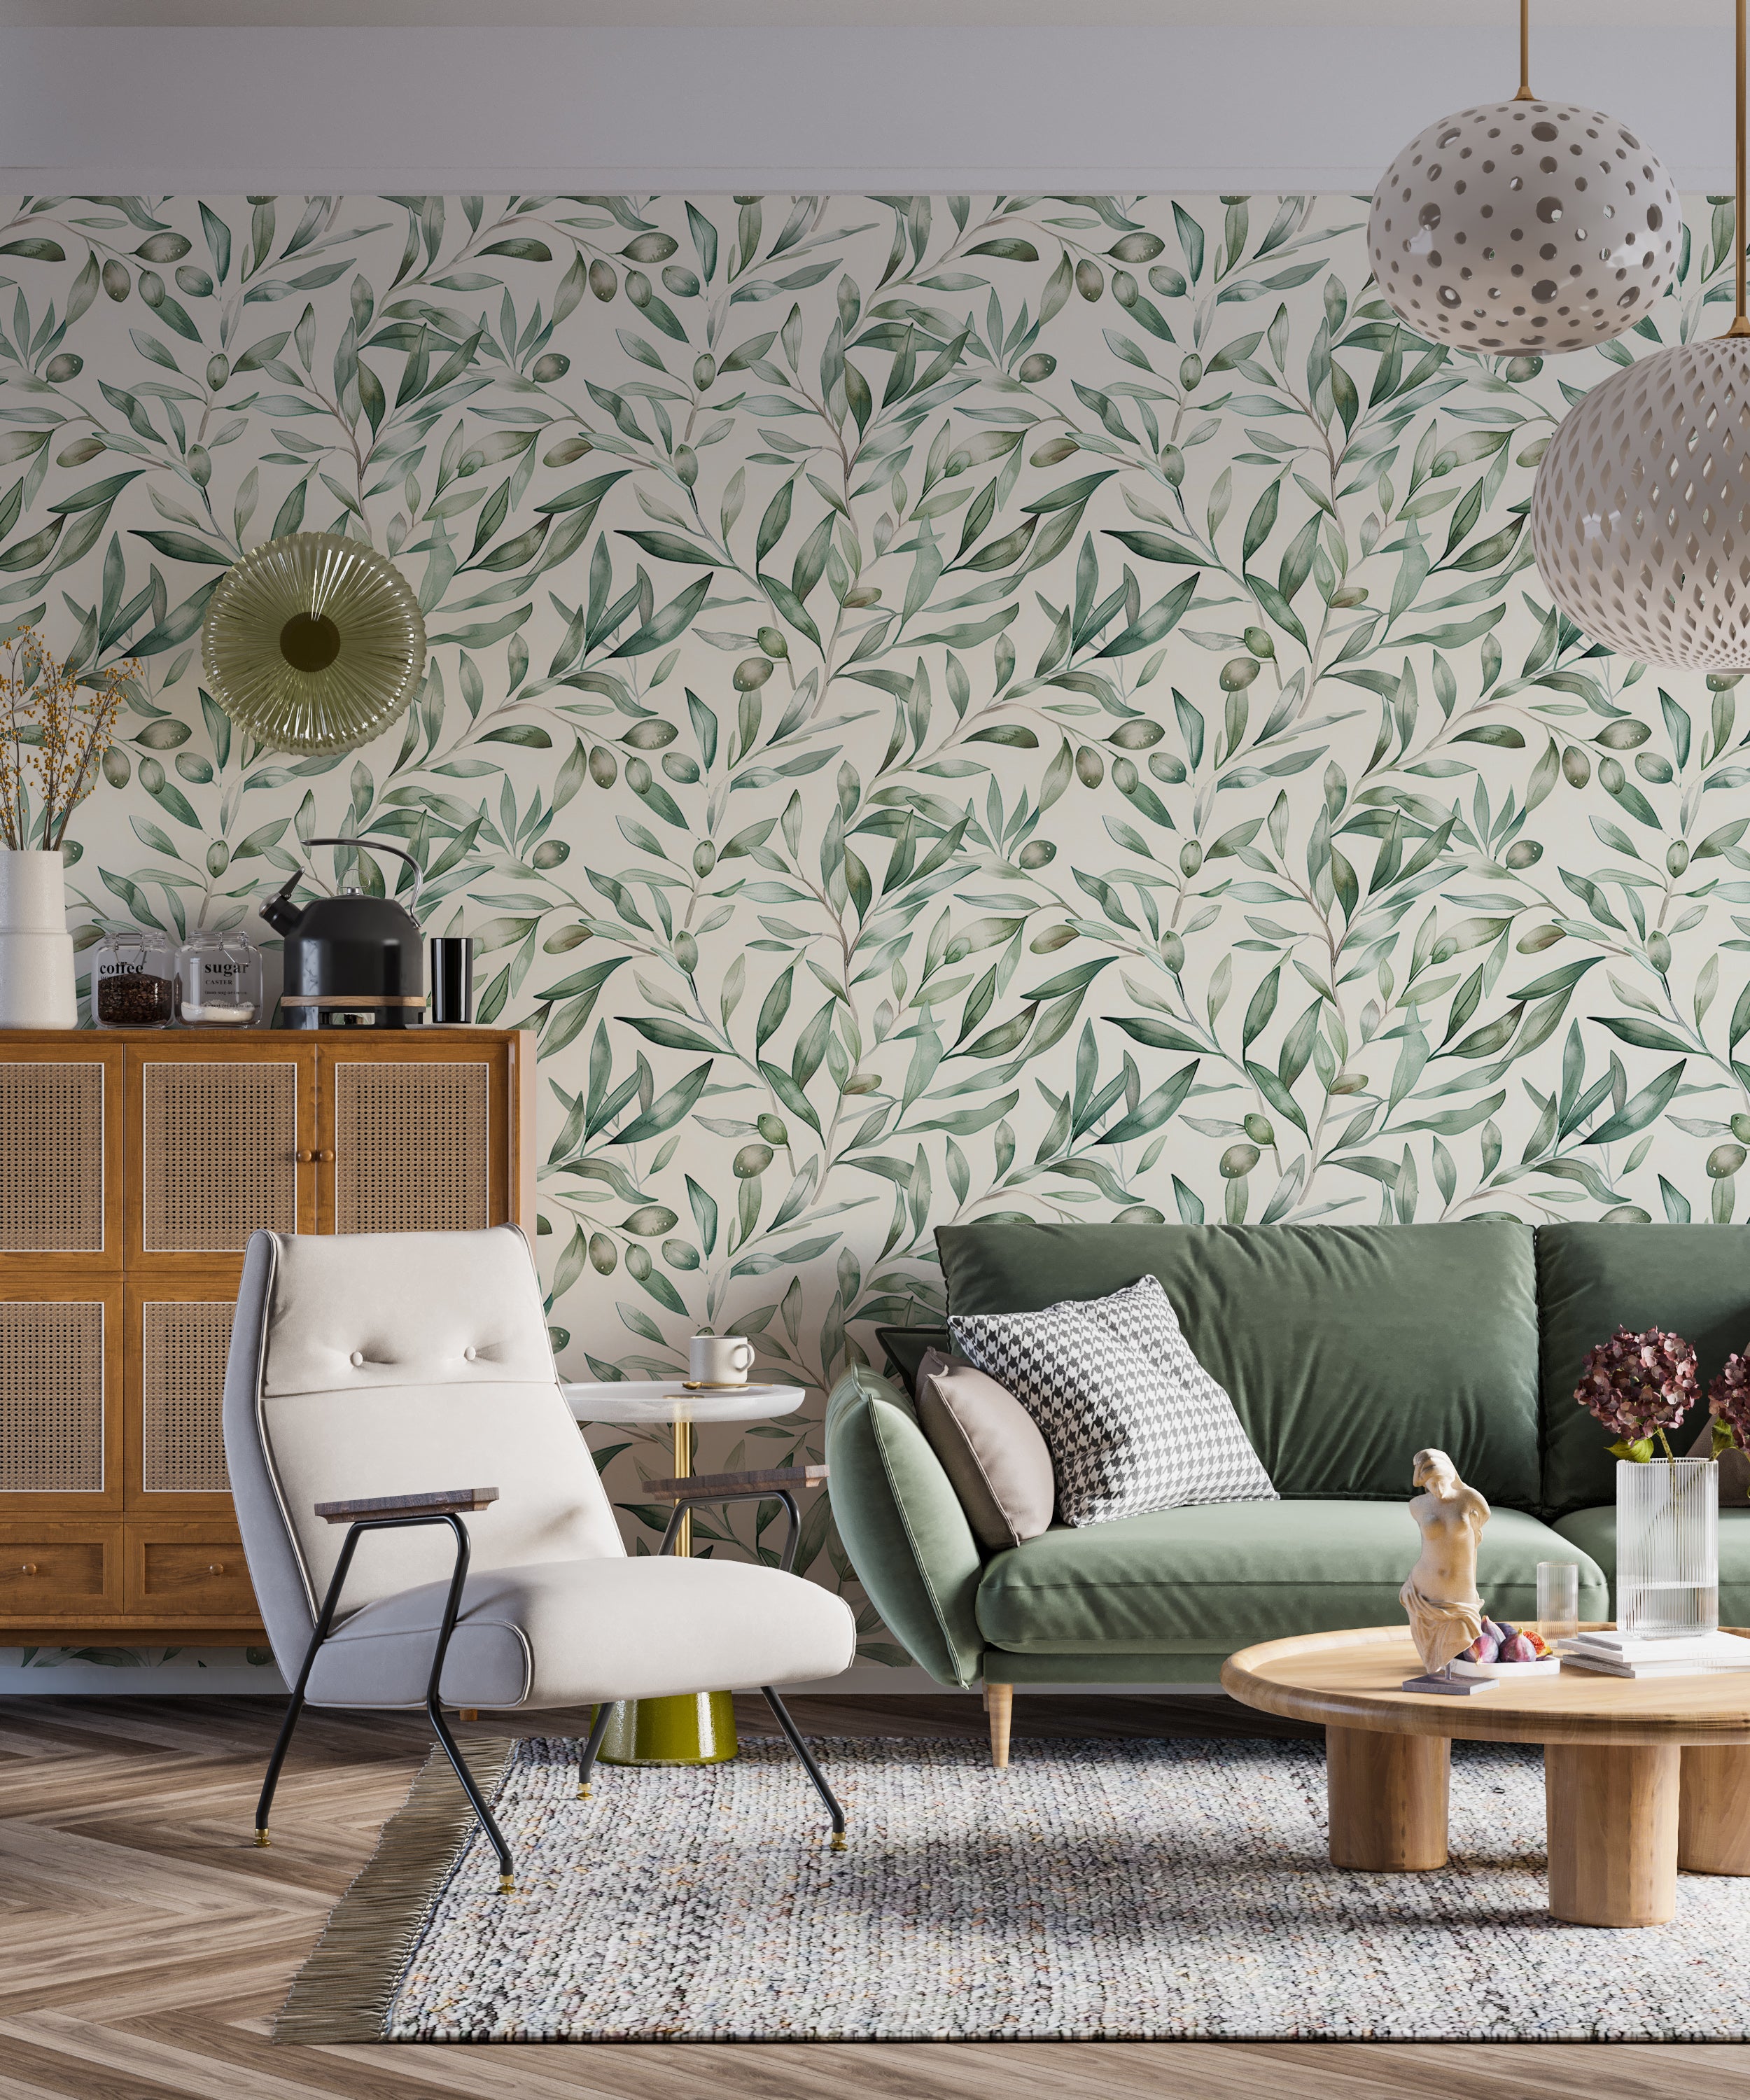 Botanical peel and stick wall art Removable muted green wallpaper